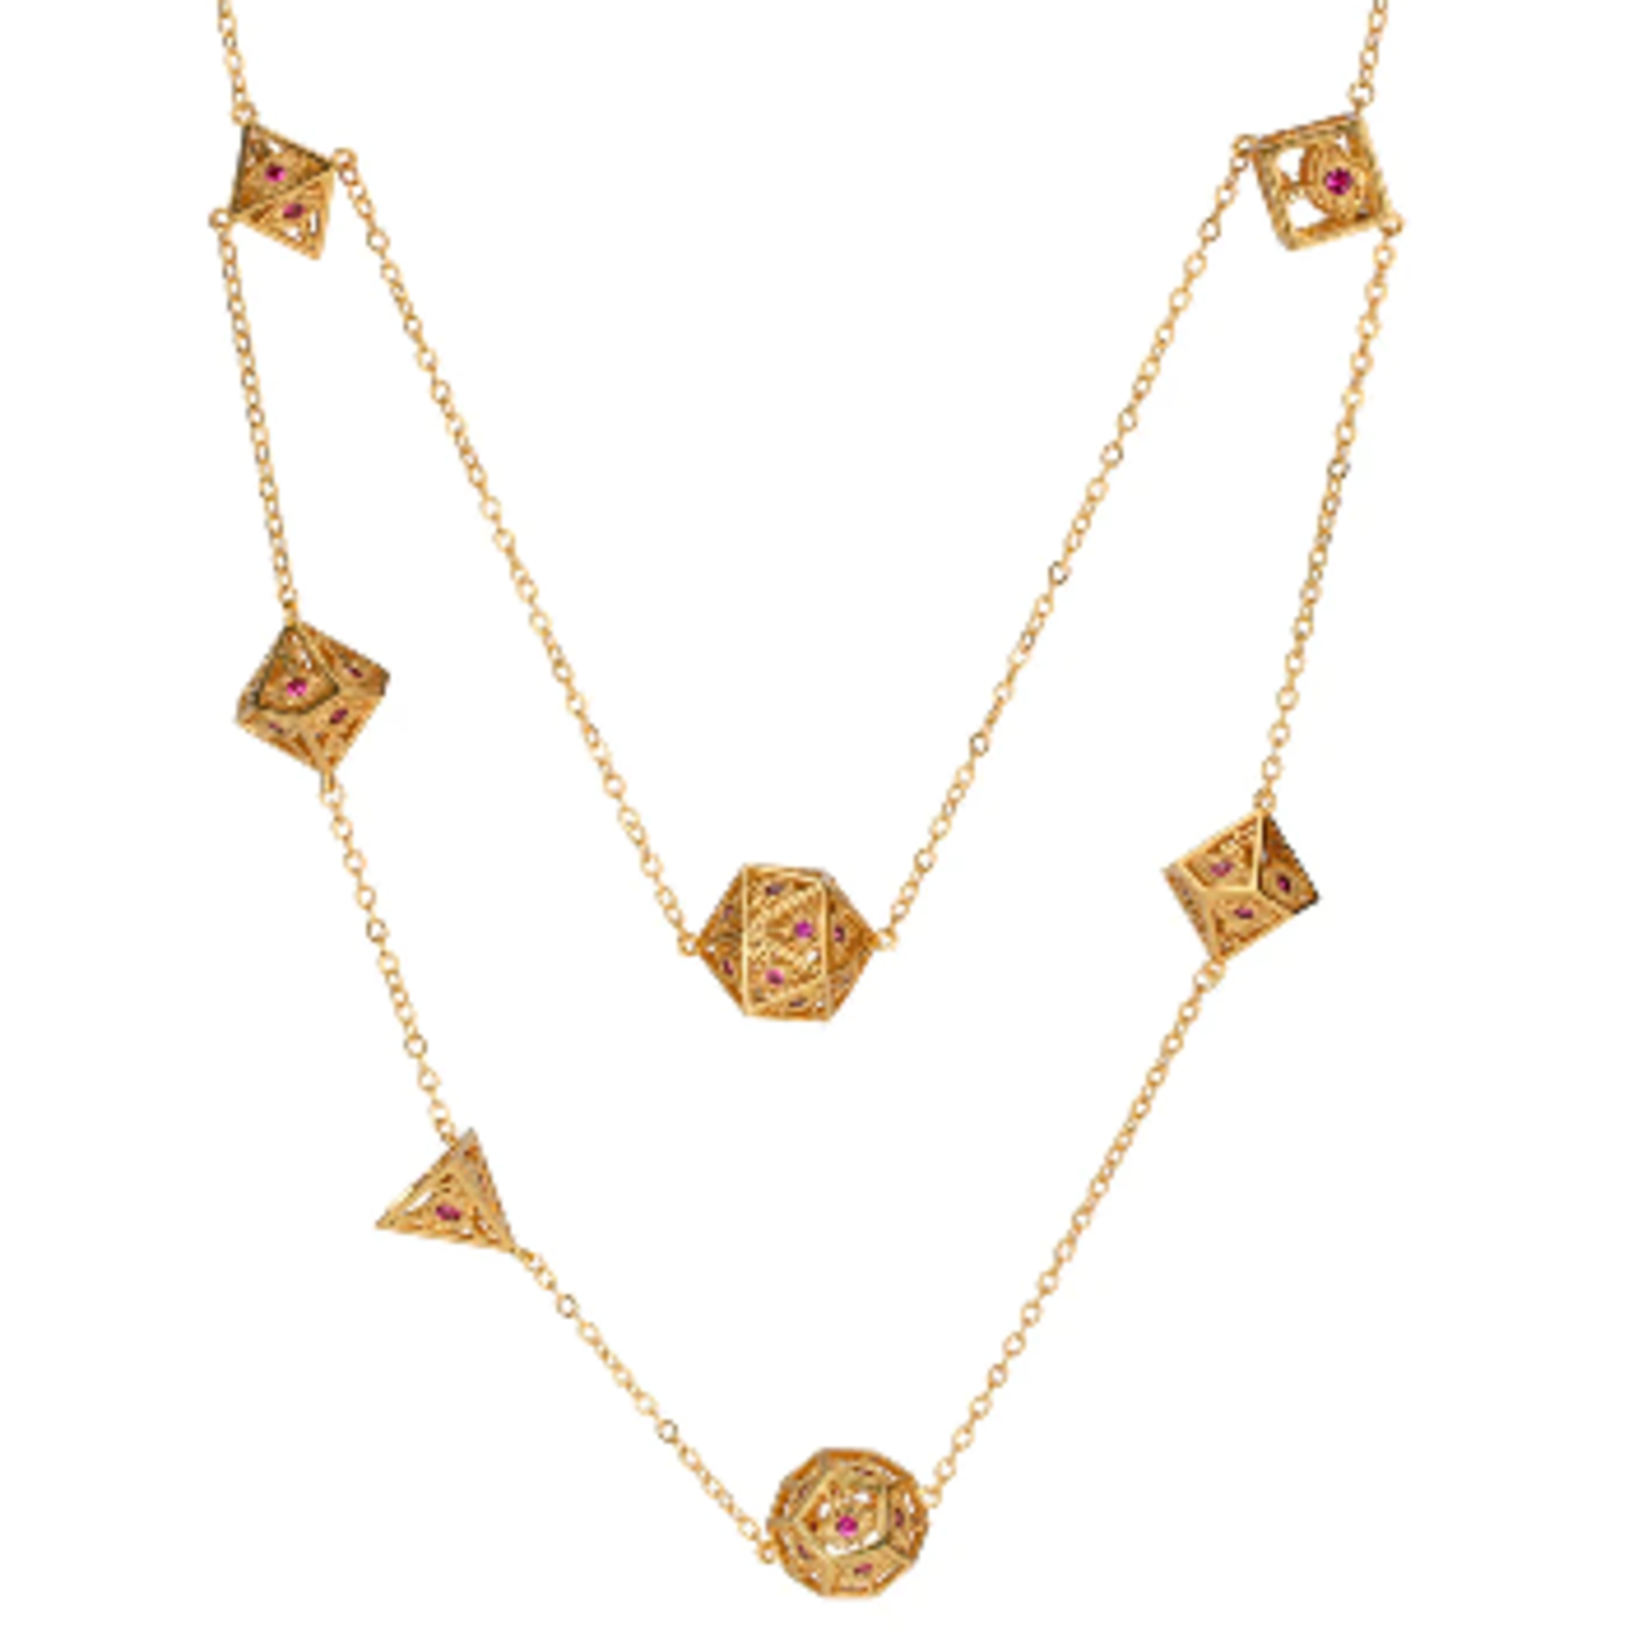 Dragon's Eye 7-die Necklace - Gold with Ruby Red Gems